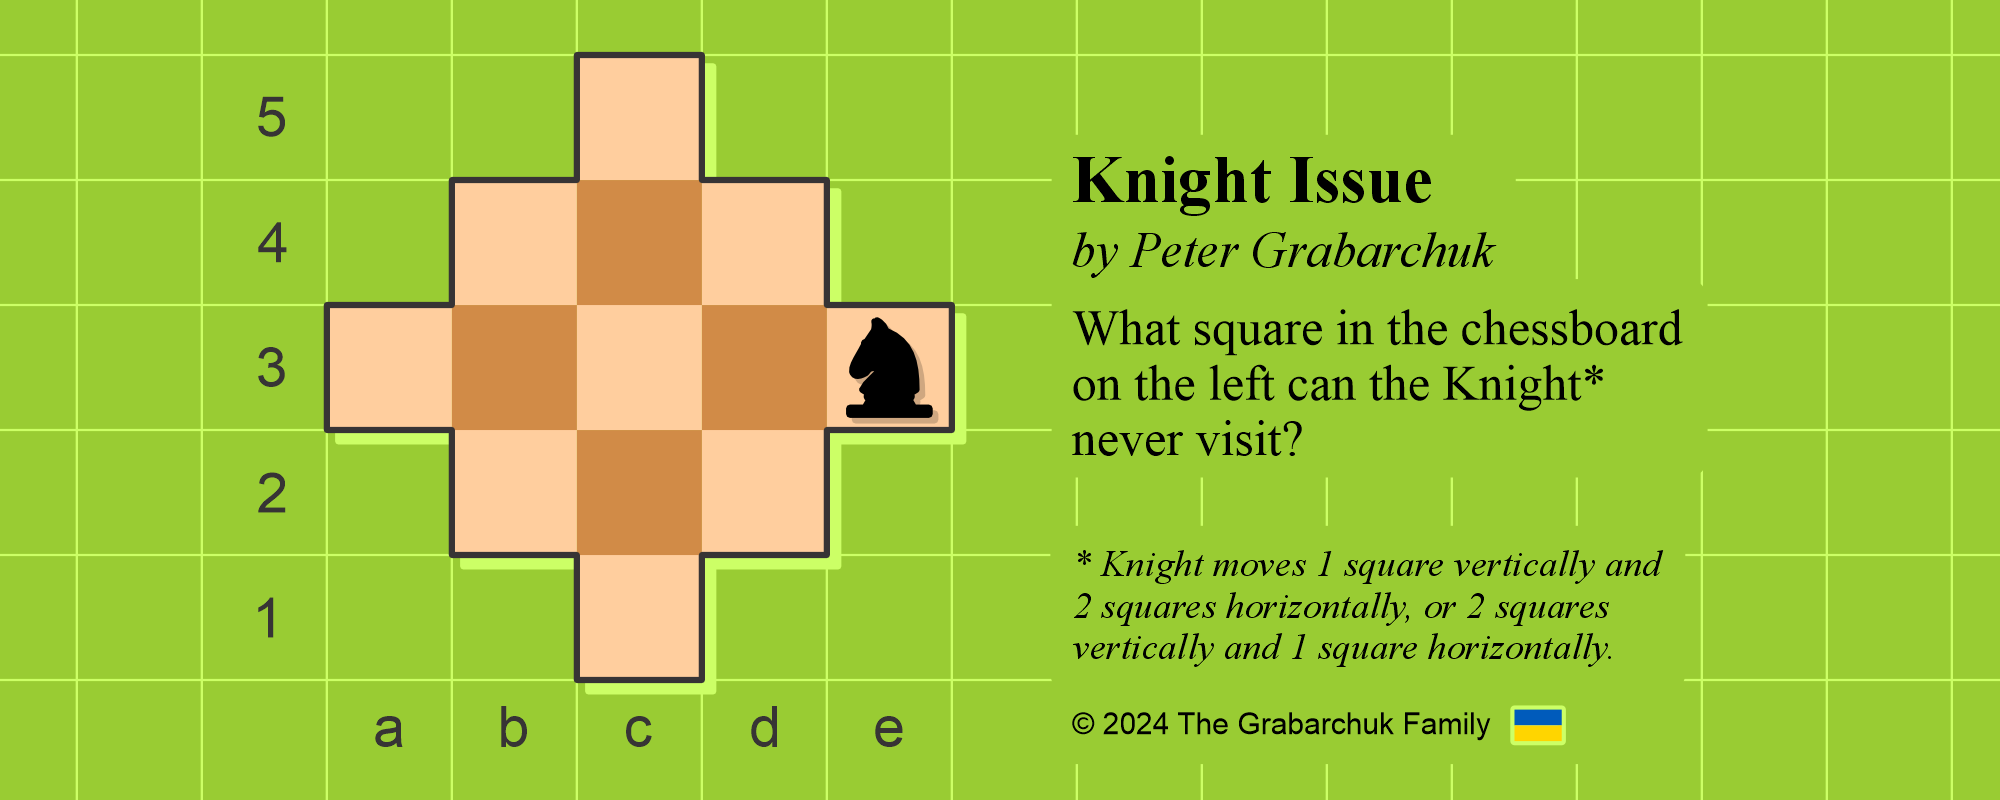 Knight Issue by Peter Grabarchuk